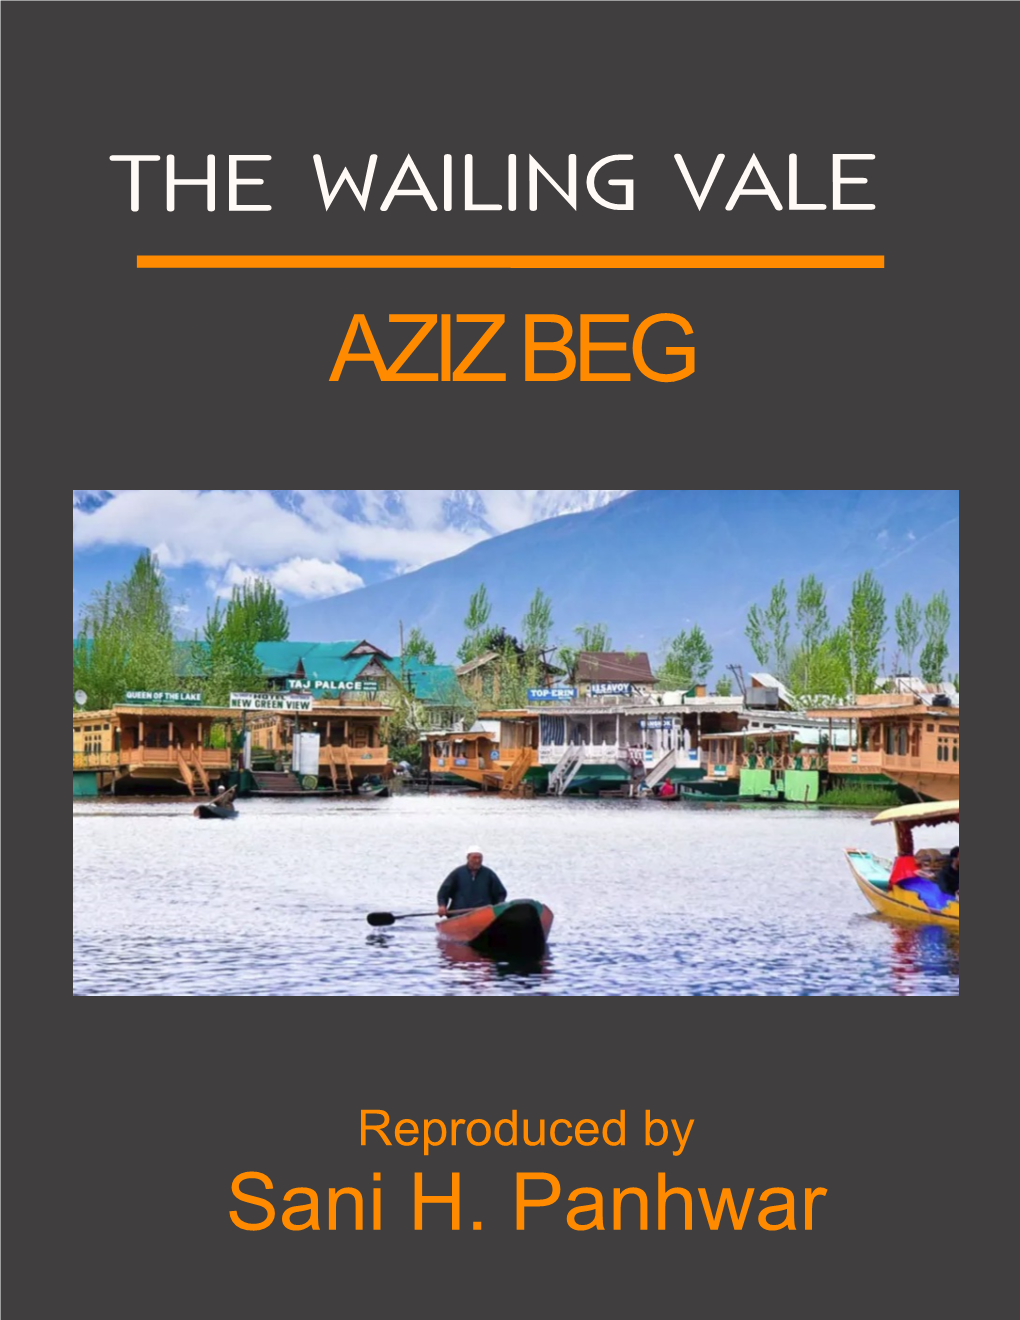 The Wailing Vale by Aziz